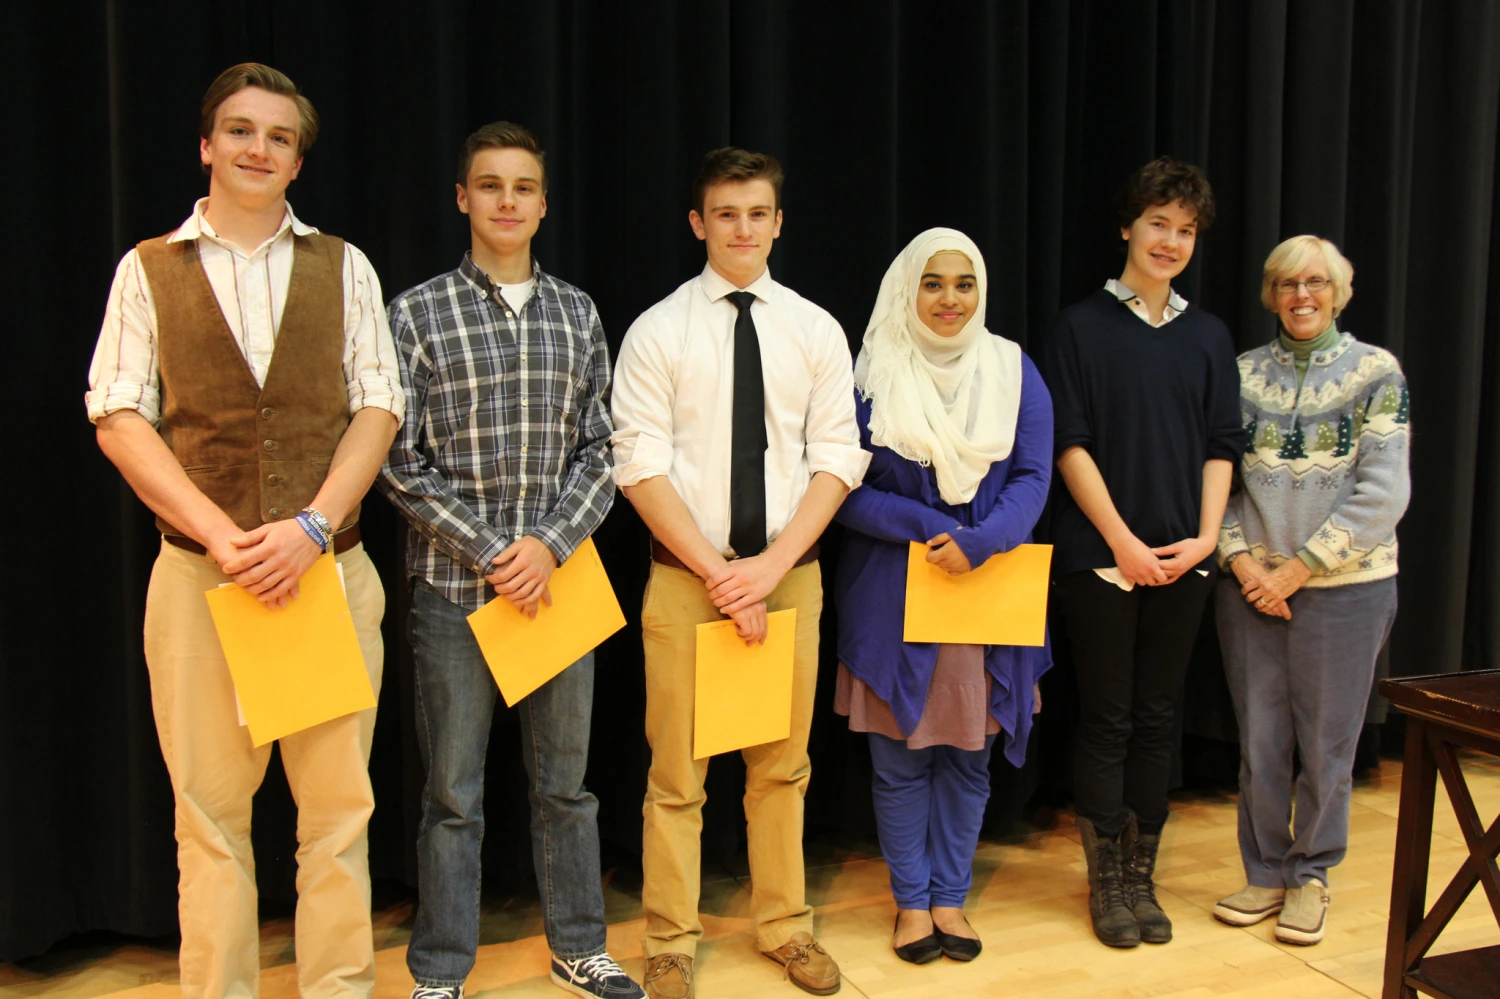 rom left to right: 1st place winner Jackson Graham, Honorable Mention winner Jack Evans, Honorable Mention winner Mitch VanAcker, 2nd place winner Nazifa Chowdhury, 3rd place winner Paulina Adams, and Center for Poetry Director Anita Skeen.